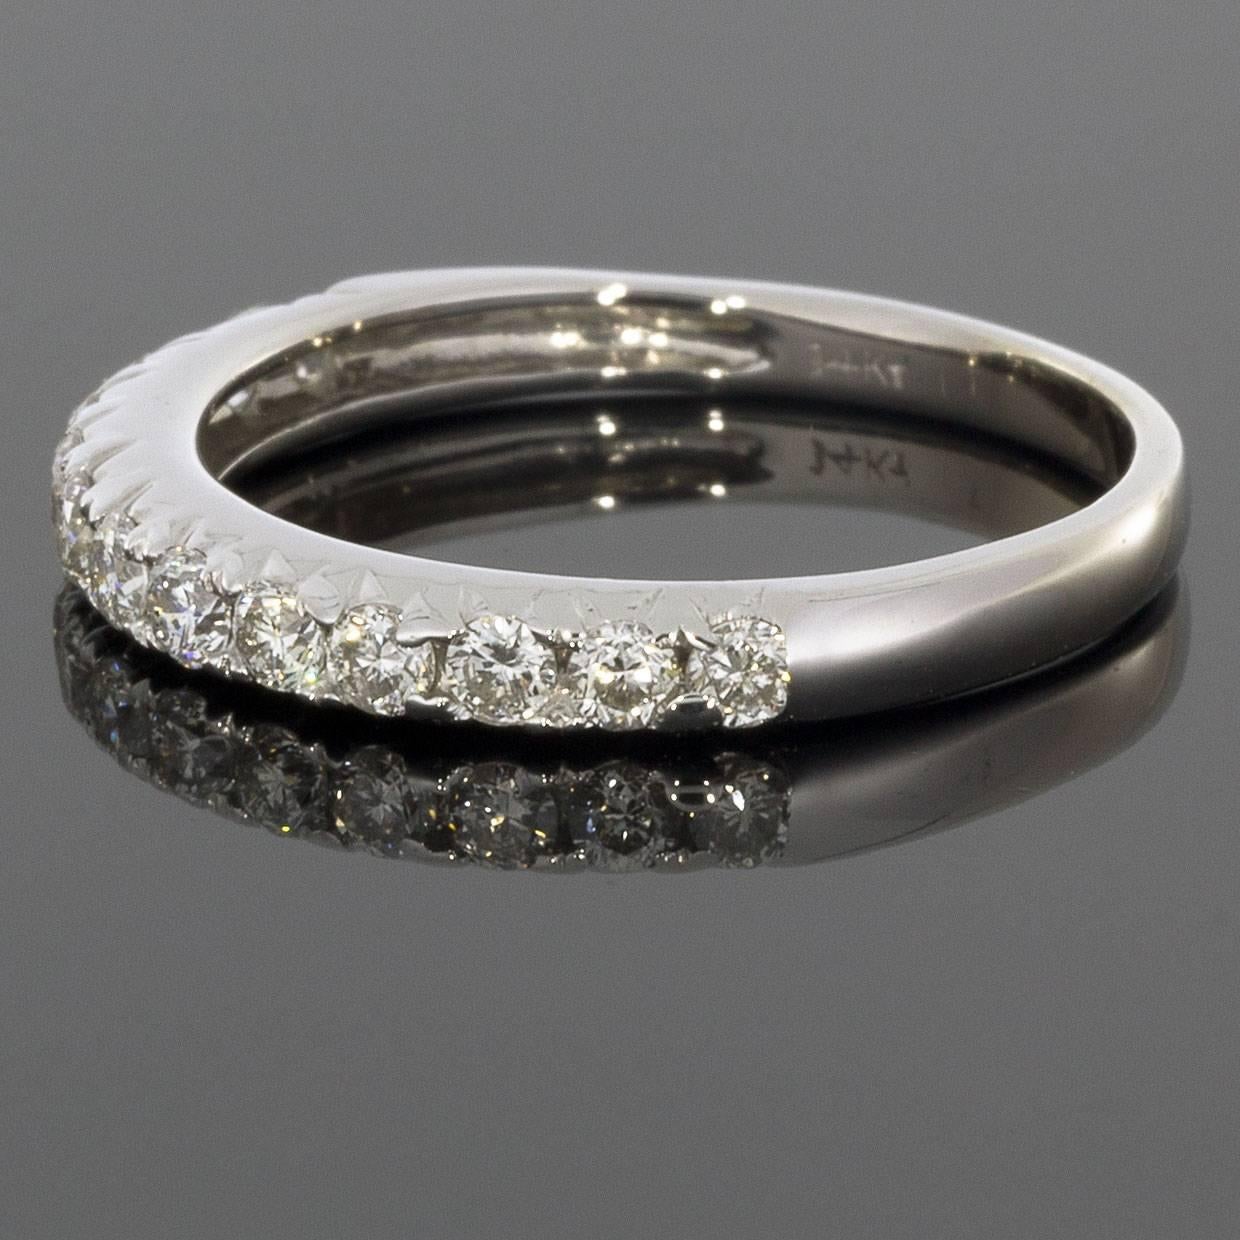 This classic band is a beautiful 14 karat white gold round diamond band that can dress up any ring. It can be used as a wedding band, stand alone band, or stack ring. The ring has 13 round cut diamonds that have a combined total weight of .42 carat.